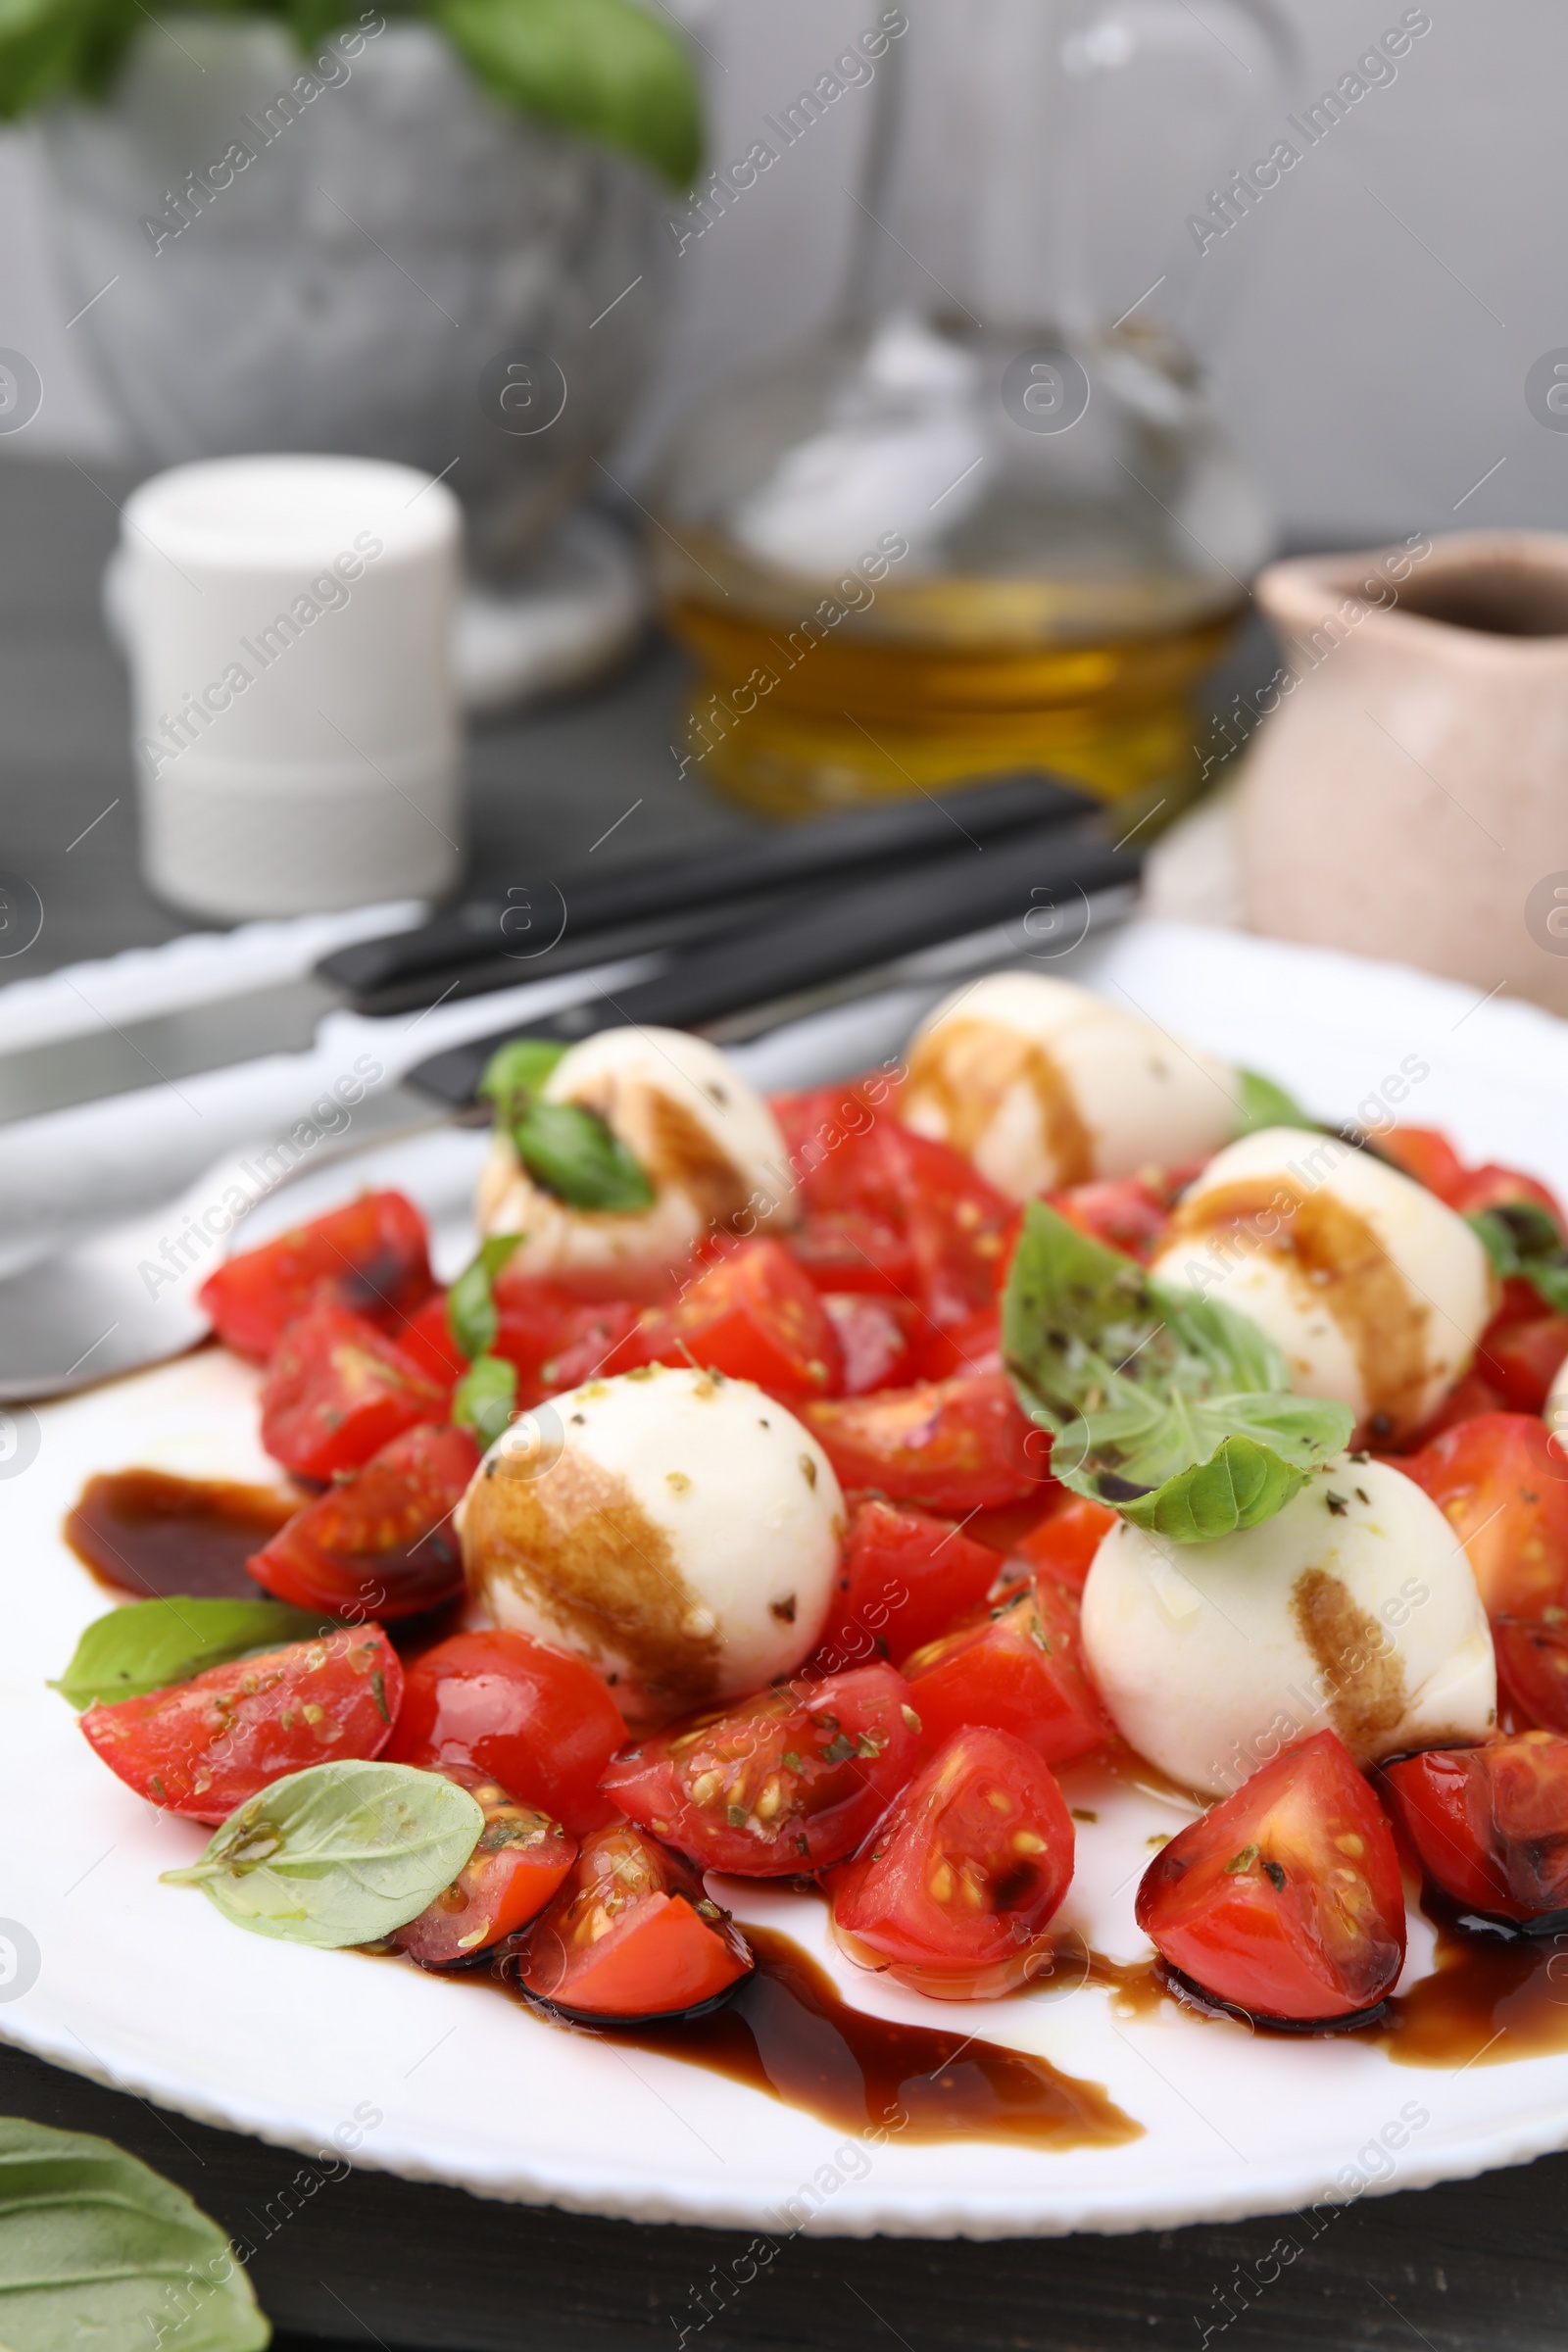 Photo of Tasty salad Caprese with tomatoes, mozzarella balls, basil and balsamic vinegar on table, closeup. Space for text